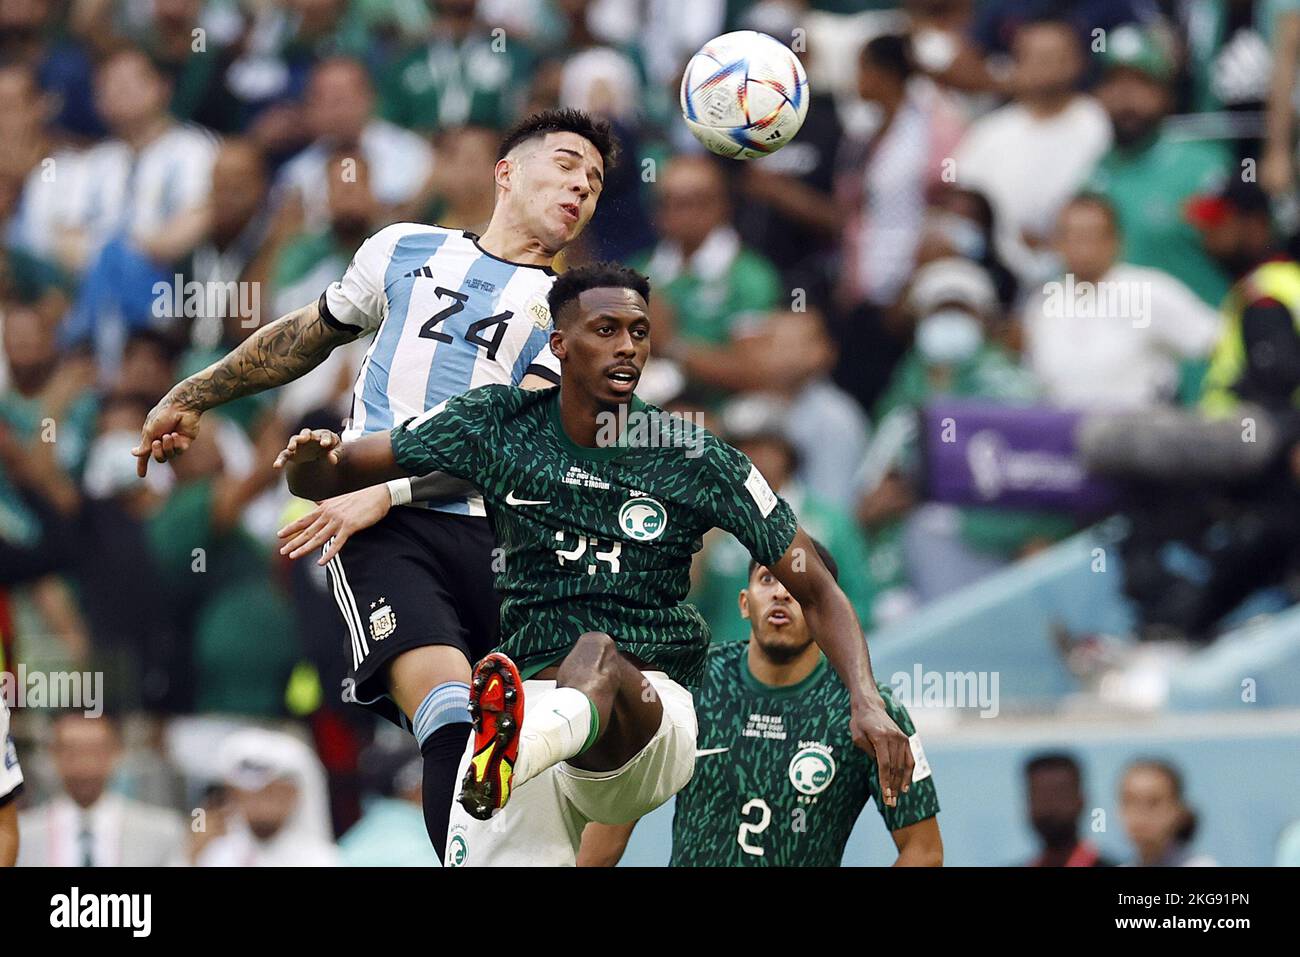 LUSAIL CITY - (l-r) Enzo Fernandez of Argentina, Mohamed Kanno of Saudi Arabia during the FIFA World Cup Qatar 2022 group C match between Argentina and Saudi Arabia at Lusail stadium on November 22, 2022 in Lusail City, Qatar. AP | Dutch Height | MAURICE OF STONE Credit: ANP/Alamy Live News Stock Photo